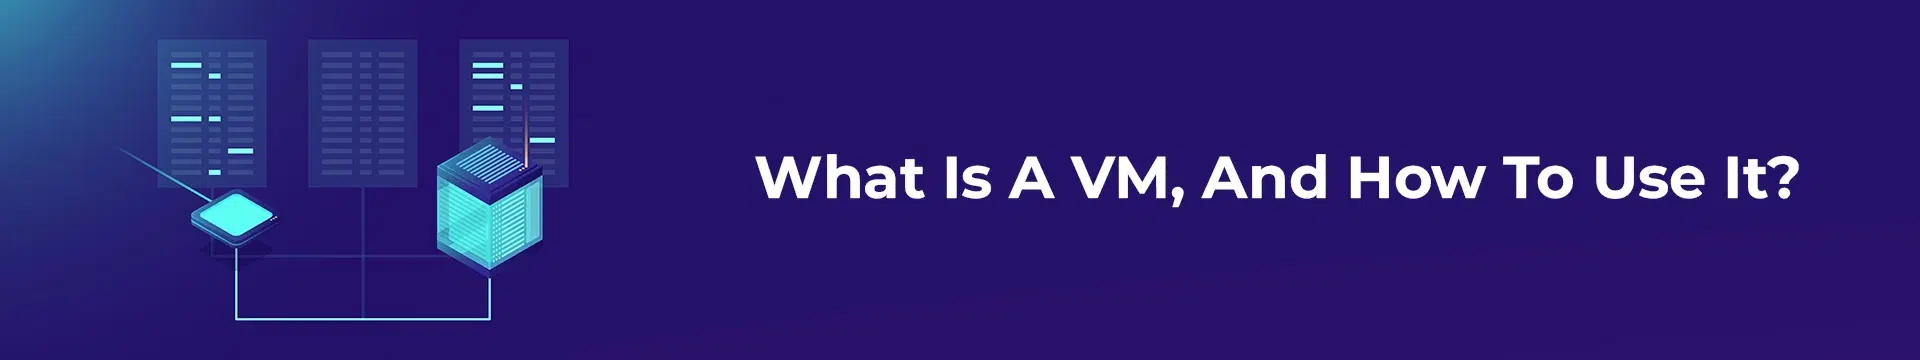 What Is A VM, And How To Use It?